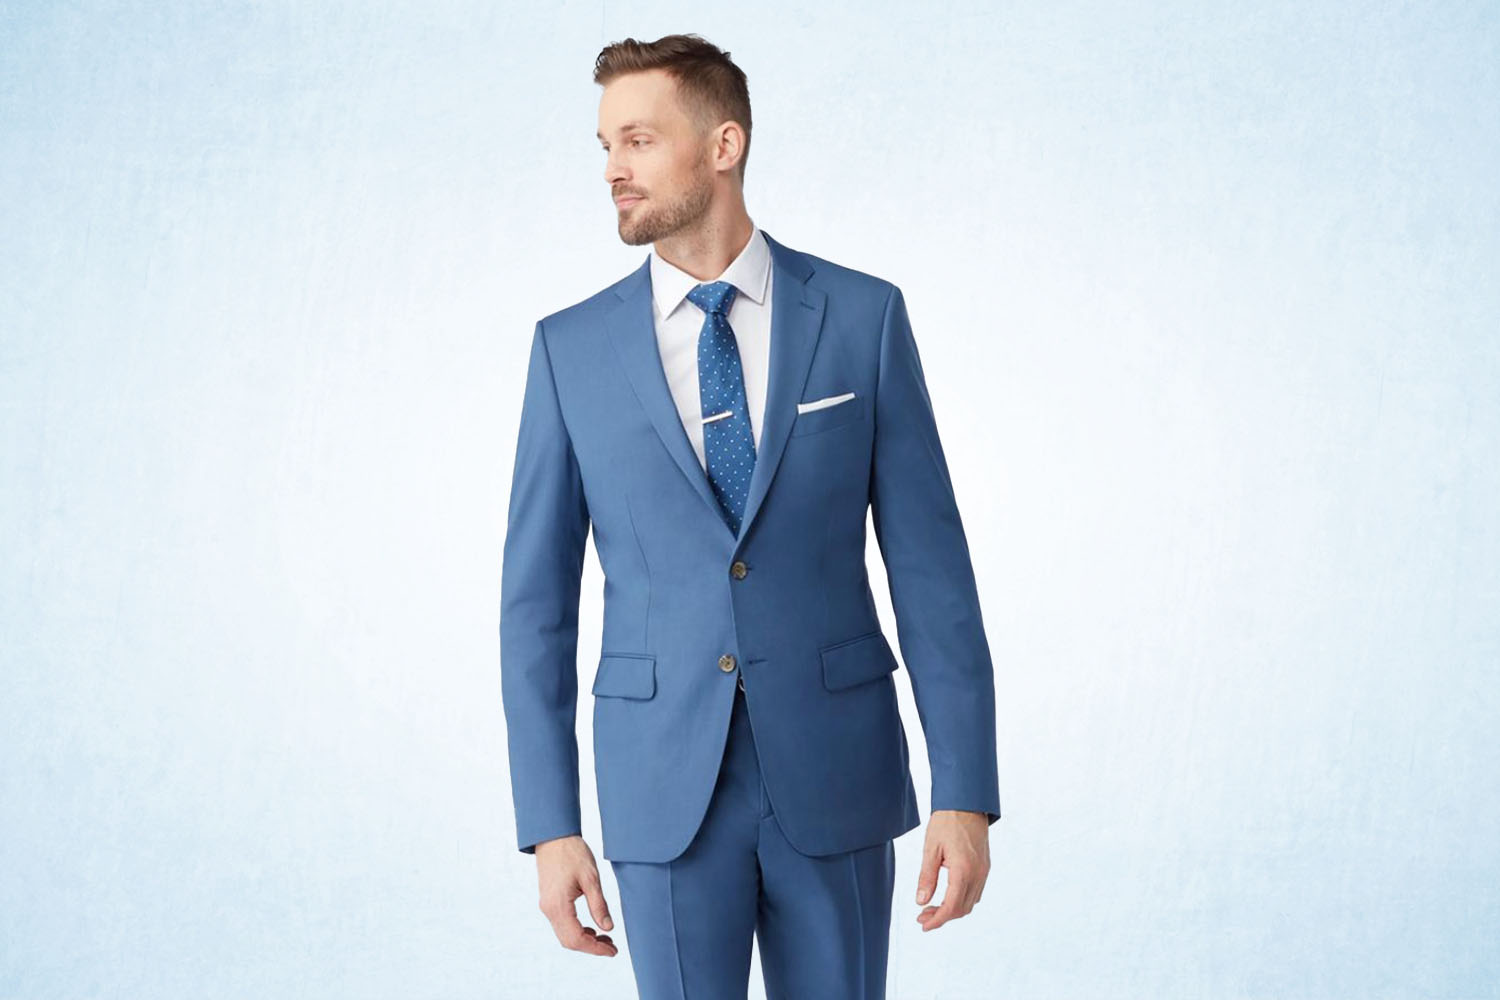 a model in a stone blue double-button suit from Indochino on a ice-blue background